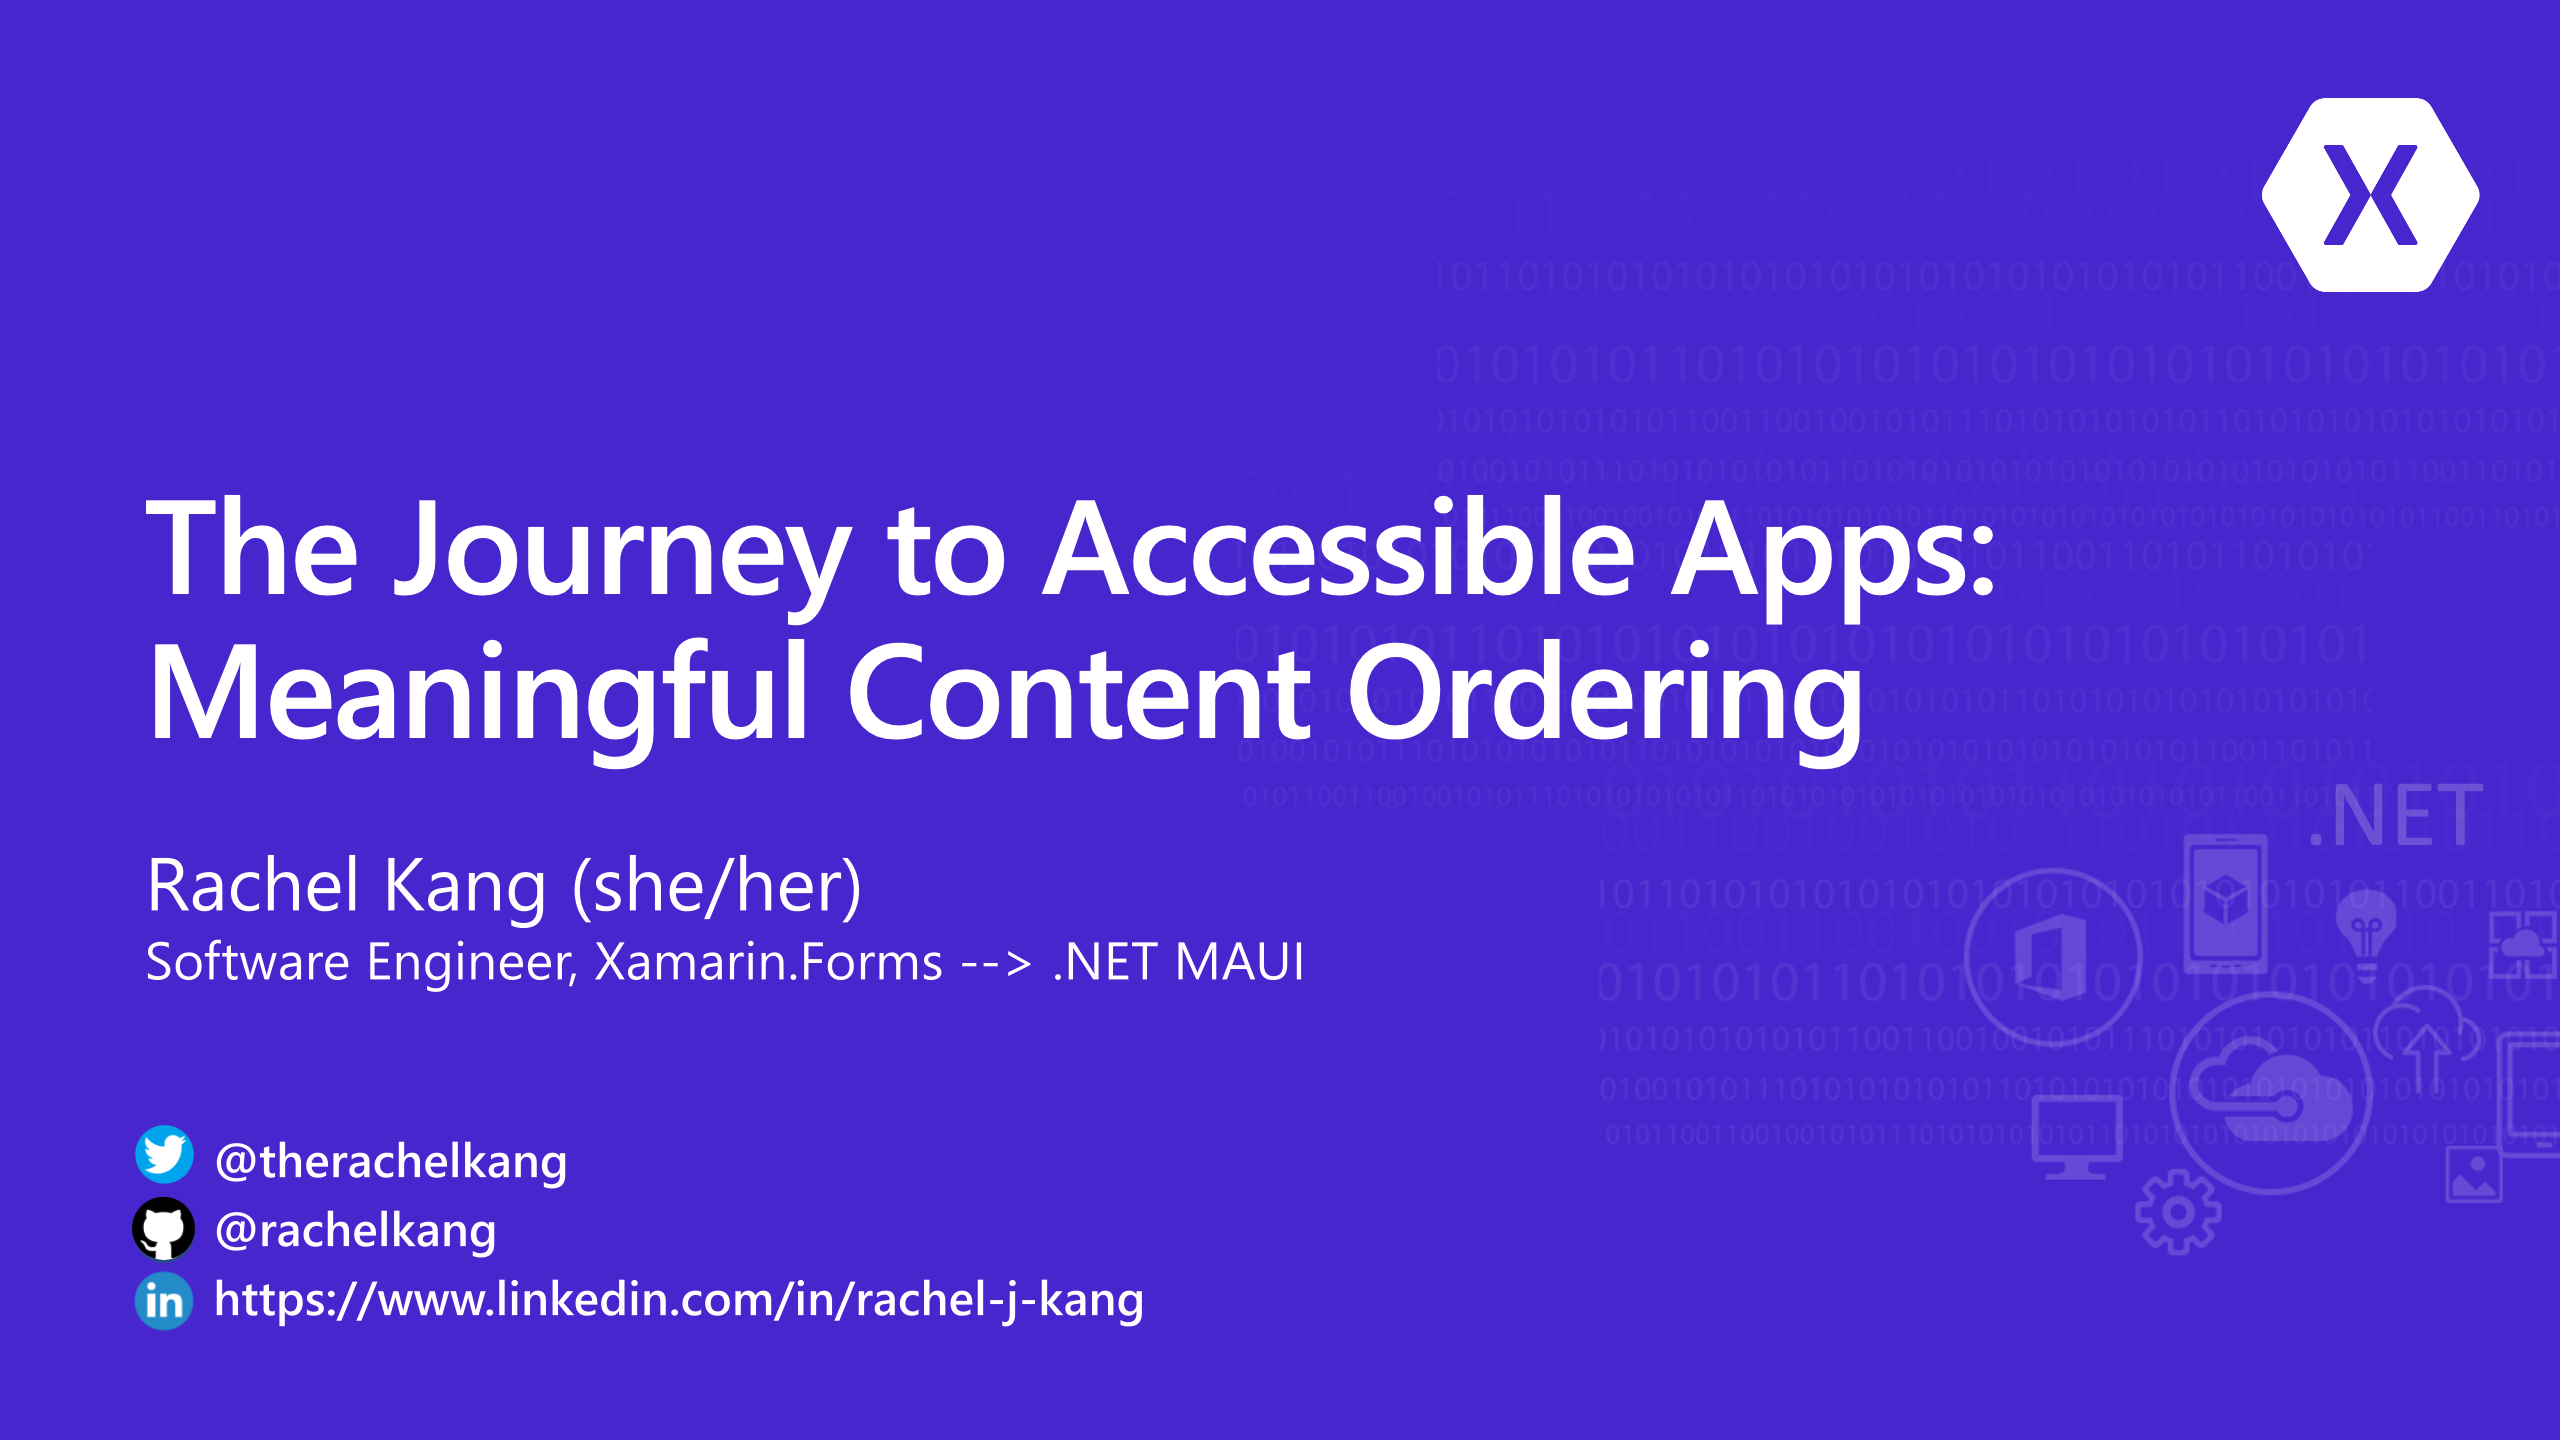 The Journey to Accessible Apps: Meaningful Content Ordering